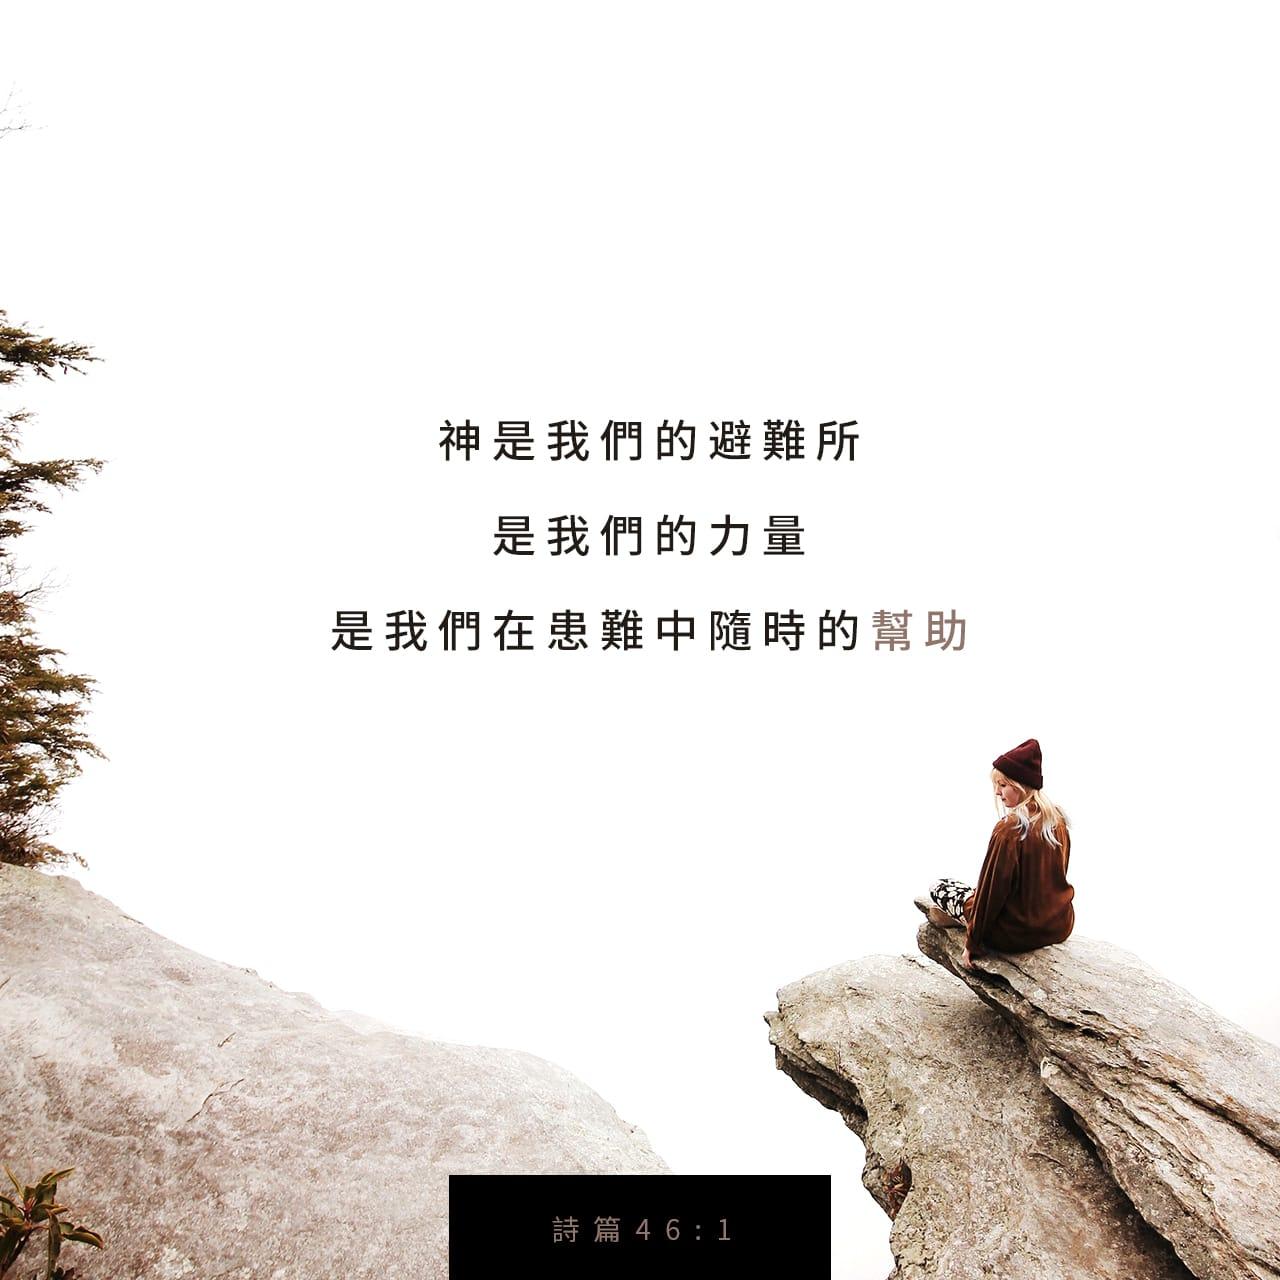 Bible Verse of the Day - day 85 - image 37739 (诗篇 46:1)